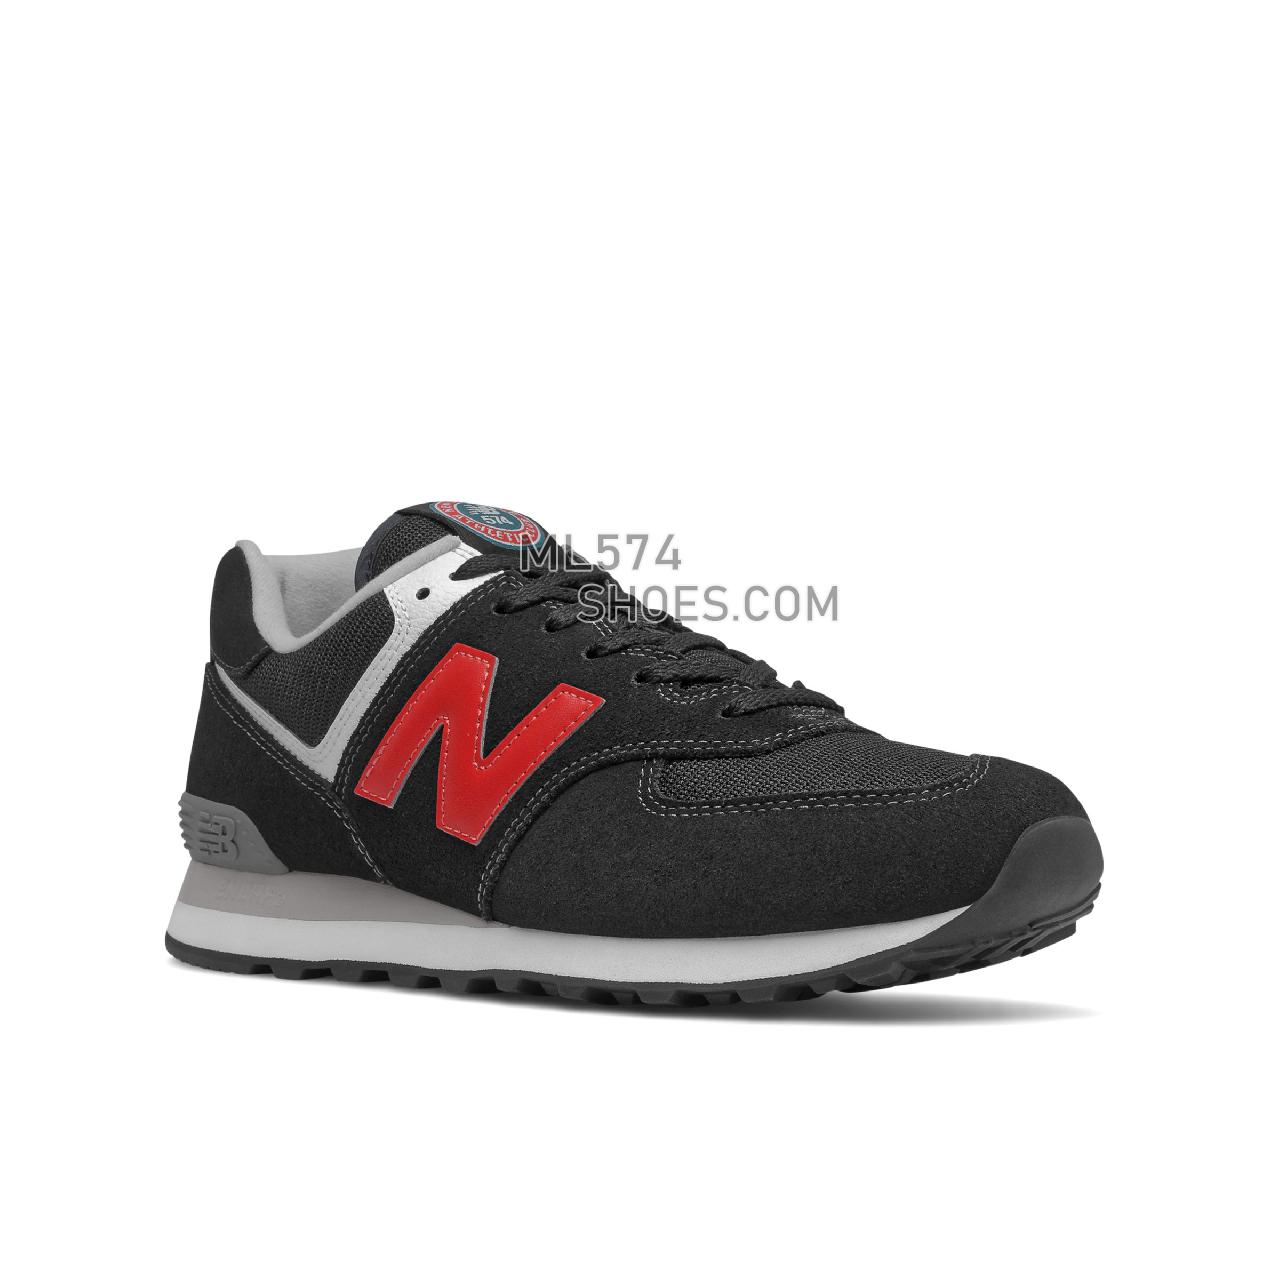 New Balance 574v2 - Men's Classic Sneakers - Black with Red - ML574HY2